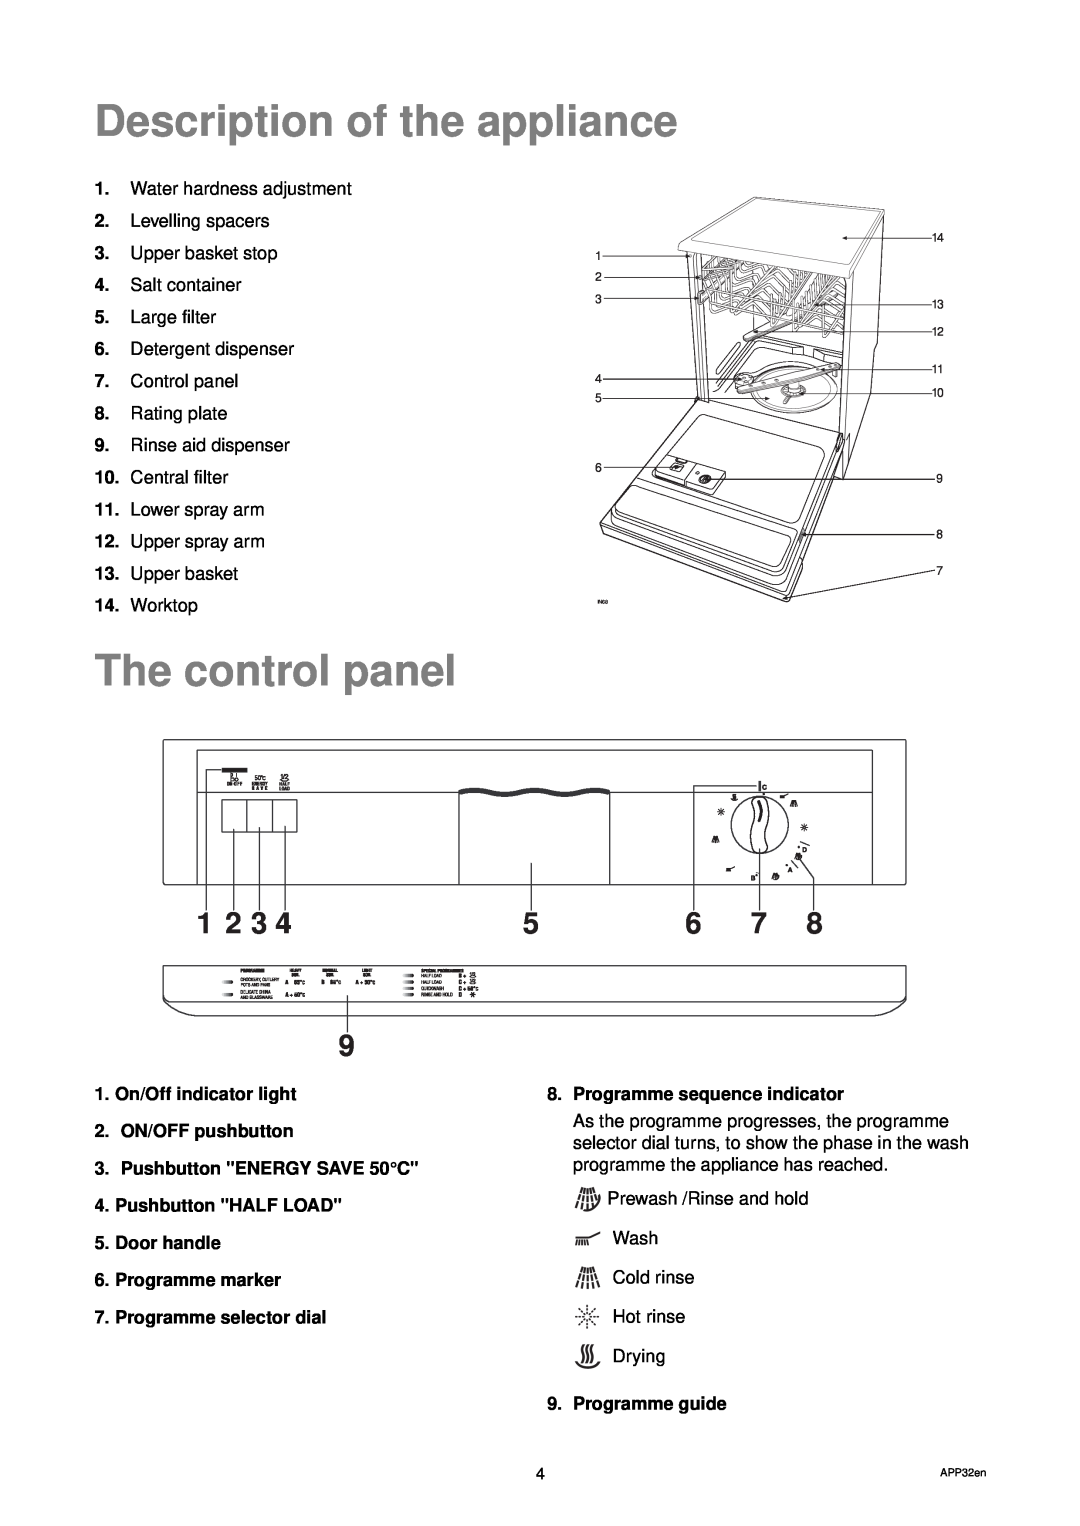 Zanussi DWS 919 manual Description of the appliance, The control panel, 1. On/Off indicator light 2. ON/OFF pushbutton, 1 2 